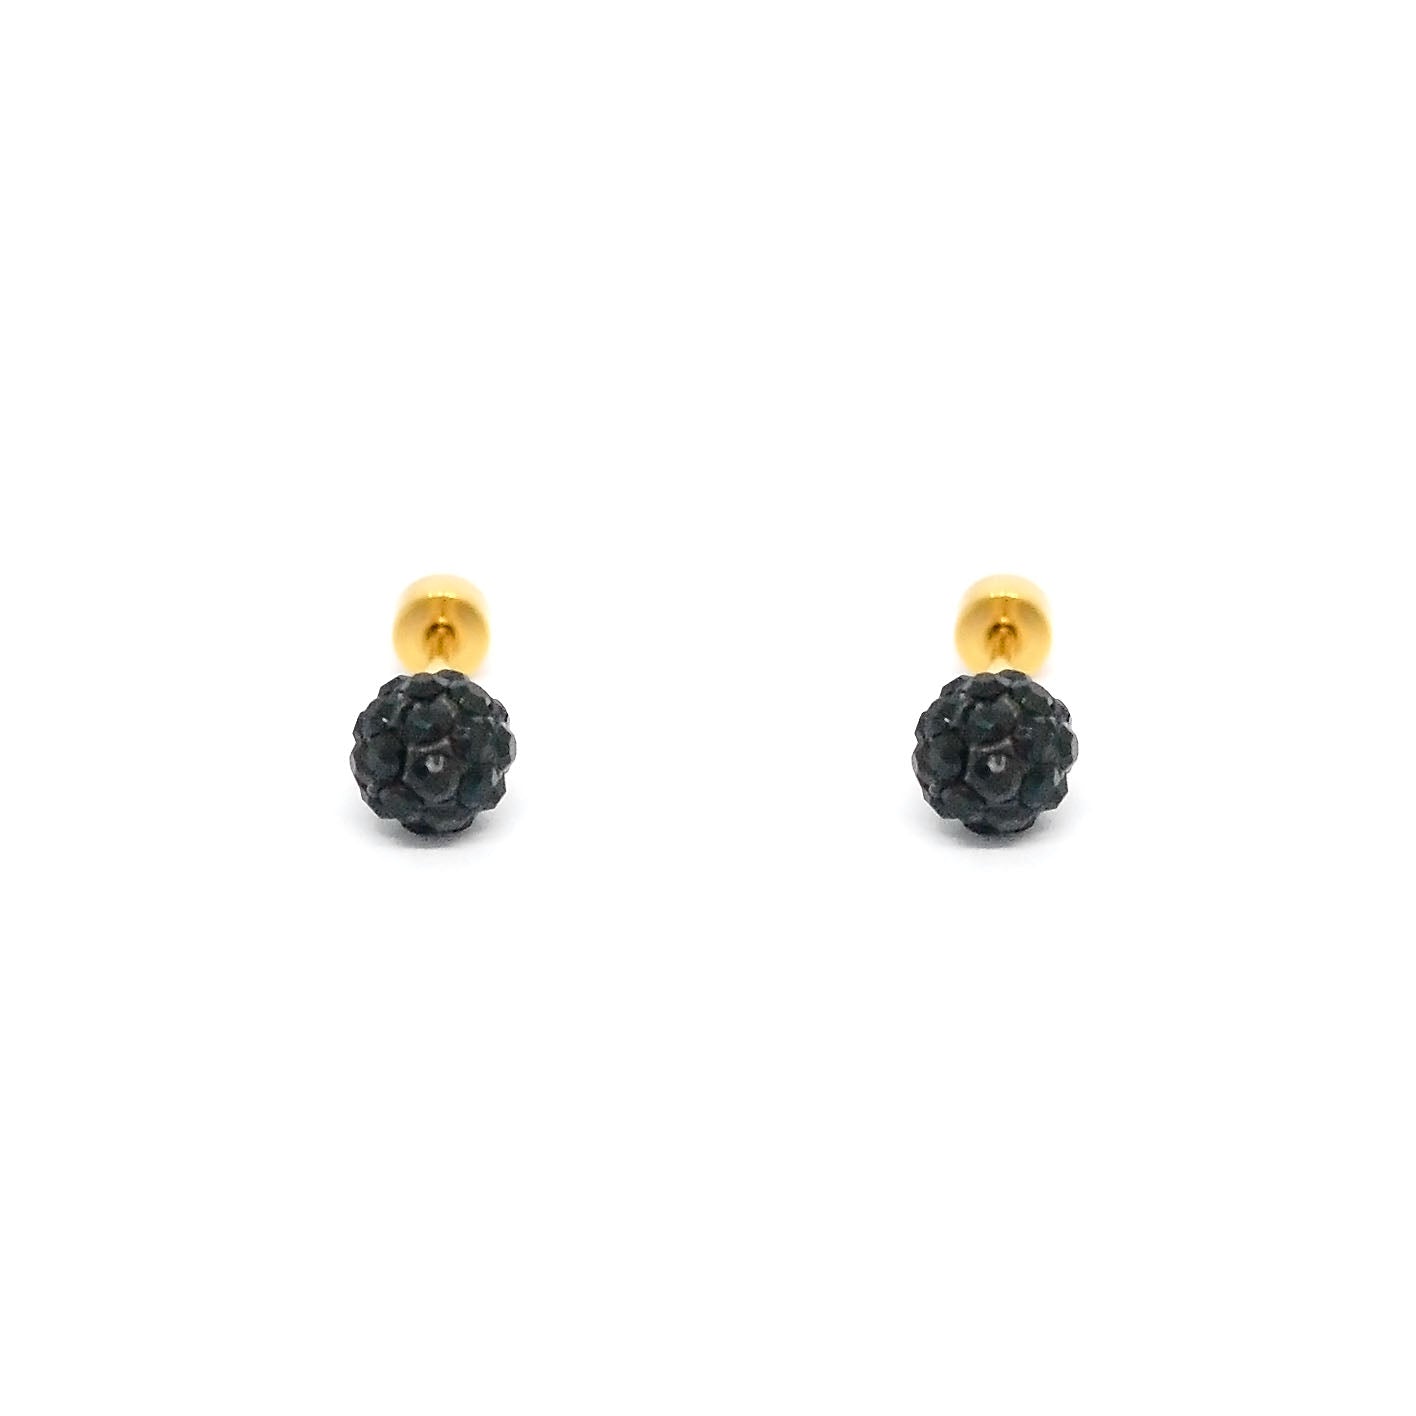 ESE 8030: All IPG Multi- Studded 6mm Cz Studs w/ Baby Safe Chapita